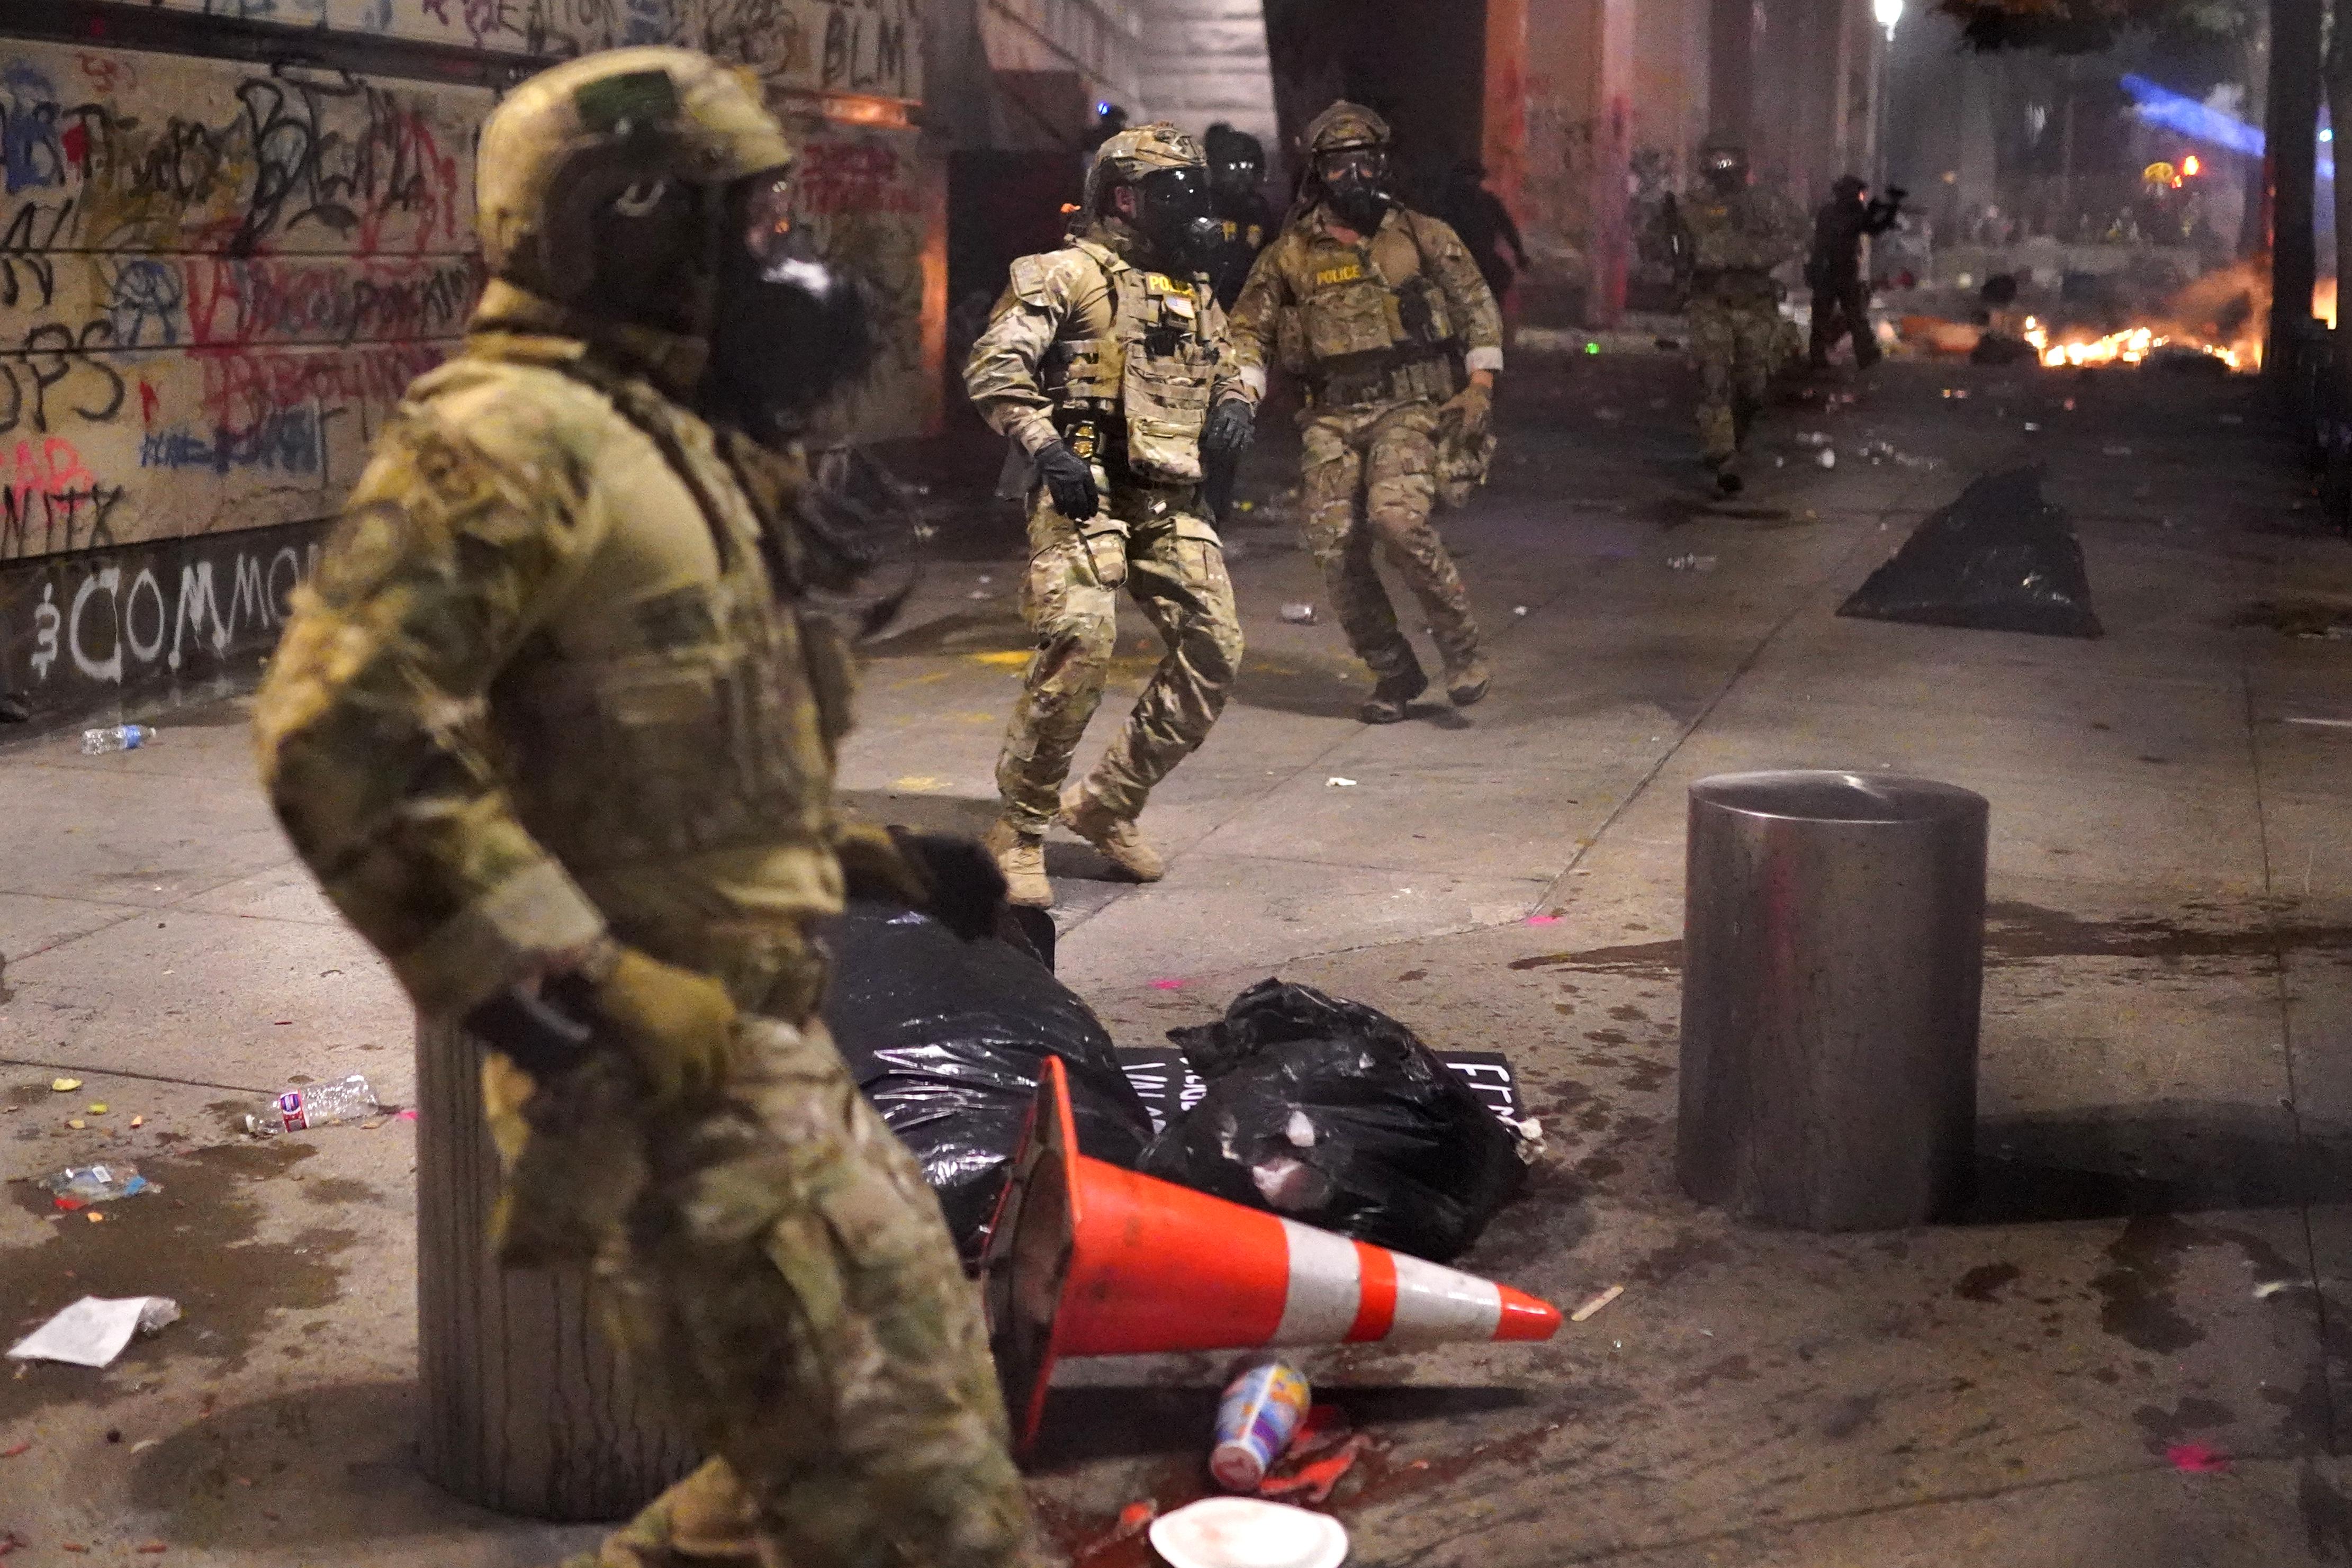 Federal officers in gas masks and camo gear surrounded by trash and graffiti.